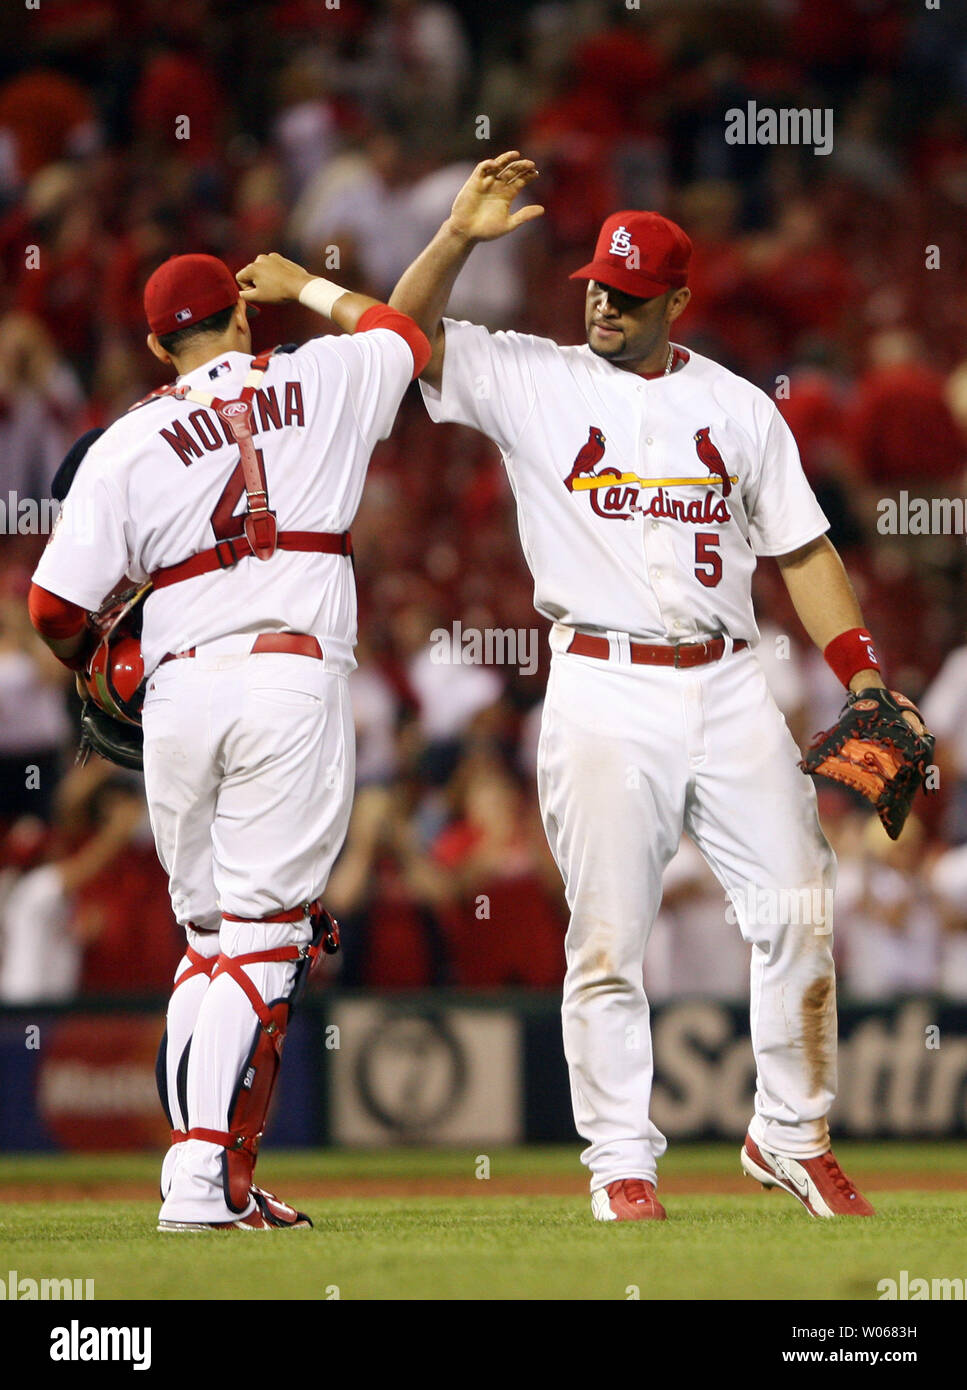 St. Louis Cardinals Albert Pujols (R) bumps elbows with teammate Yadier  Molina as the two celebrate after defeating the Florida Marlins 13-6 at  Busch Stadium in St. Louis on August 30, 2006. (